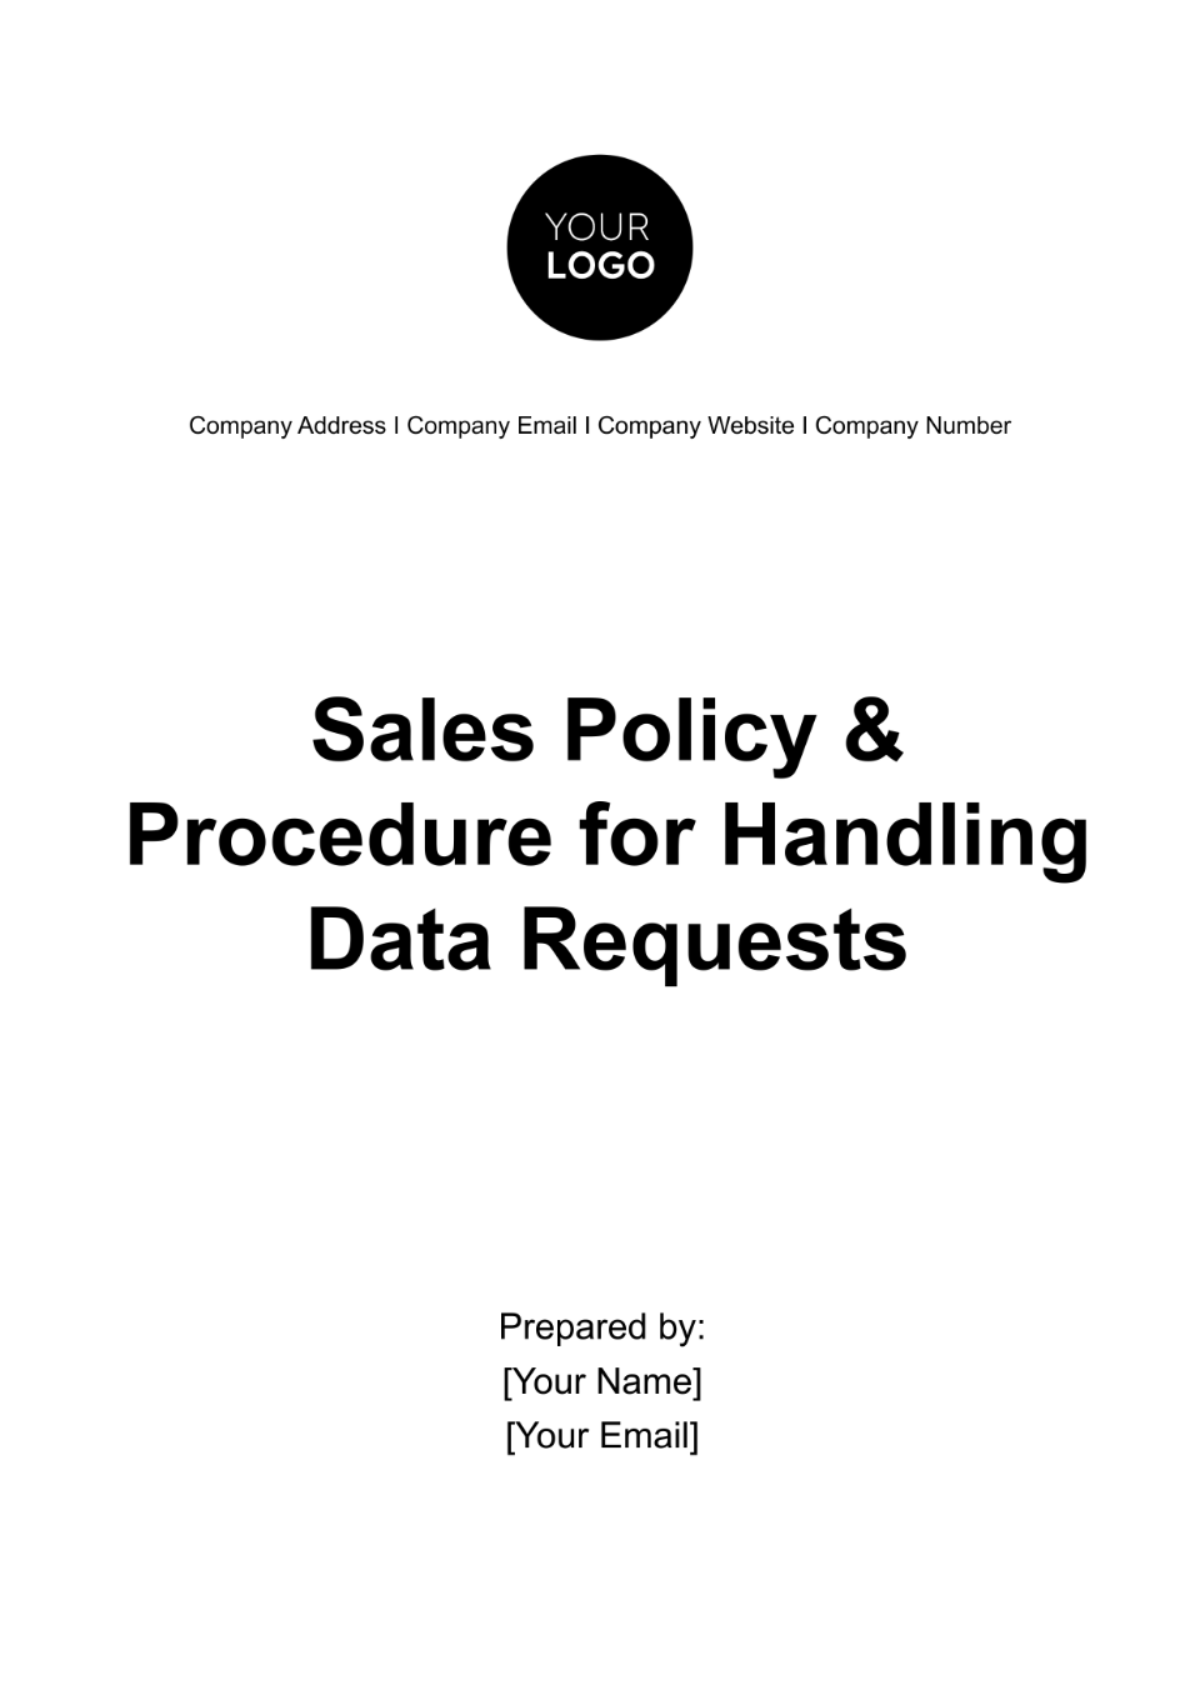 Sales Policy & Procedure for Handling Data Requests Template